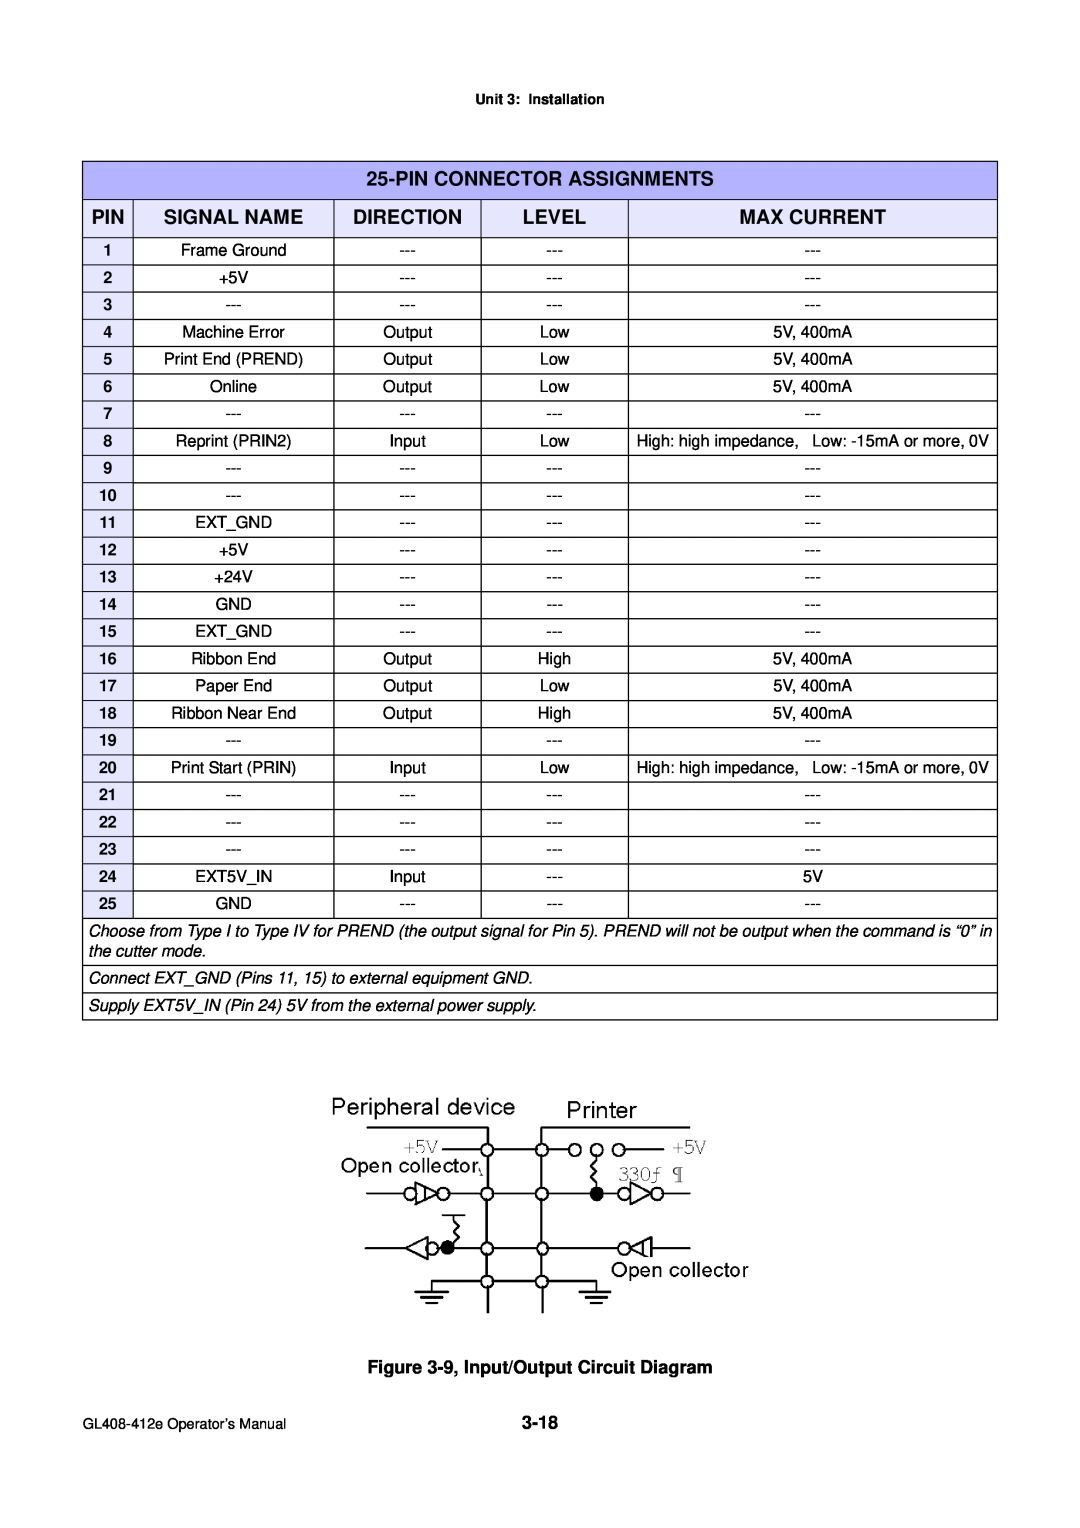 SATO GL4XXE manual Pin Connector Assignments, Signal Name, Direction, Level, Max Current 